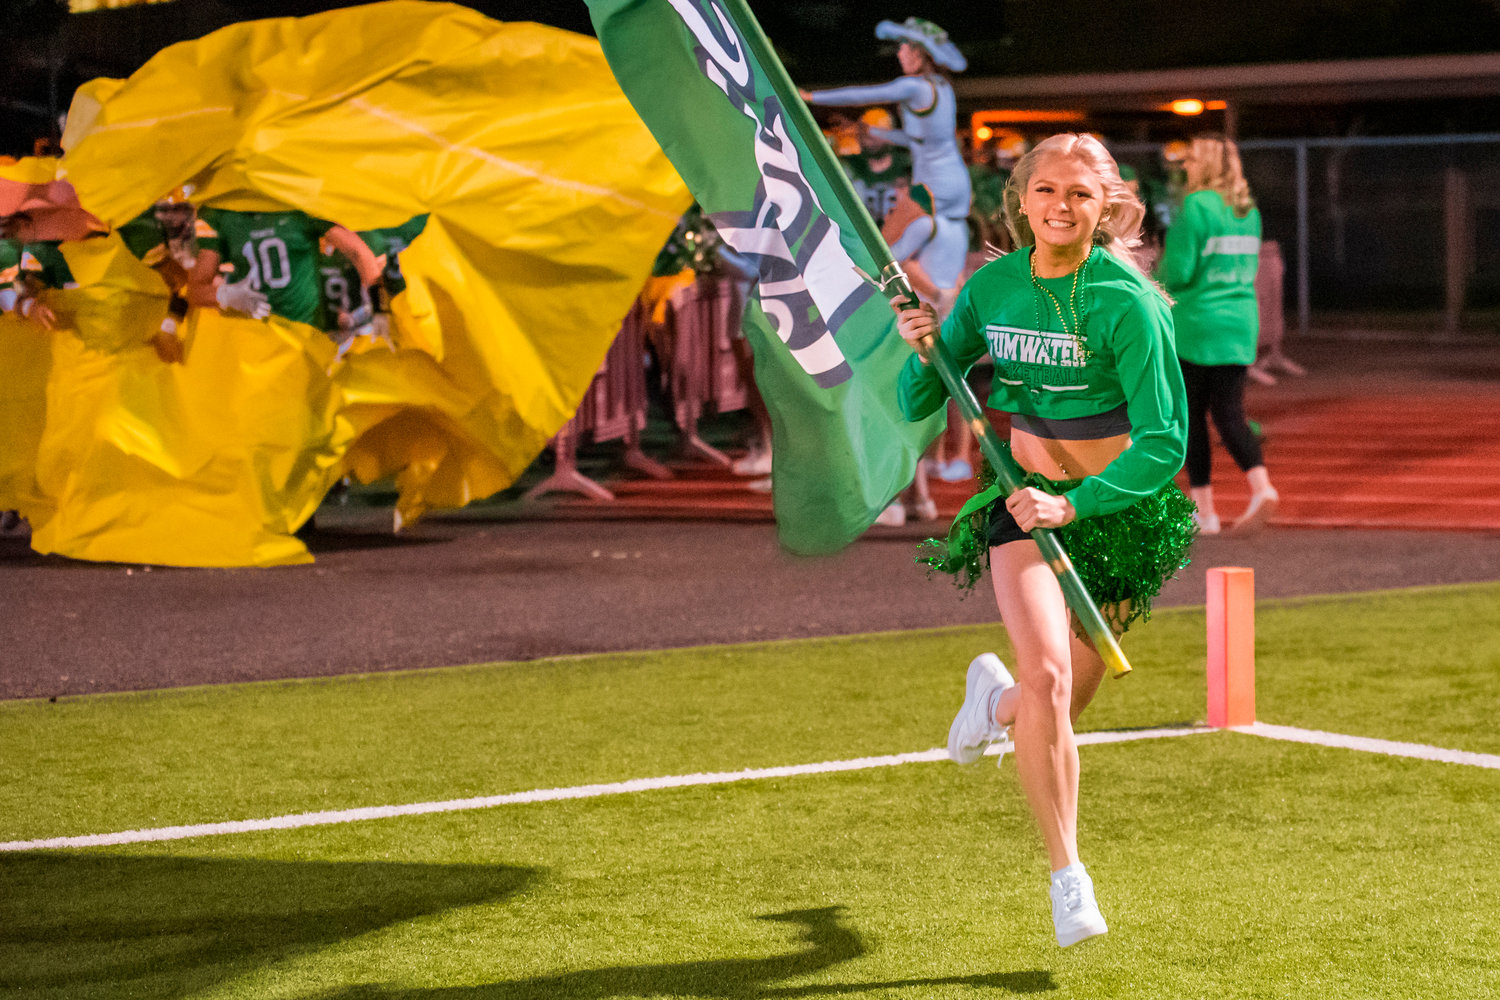 Avery Coker runs with the Tumwater flag as players bust through a paper enterance to the field at halftime Friday night.